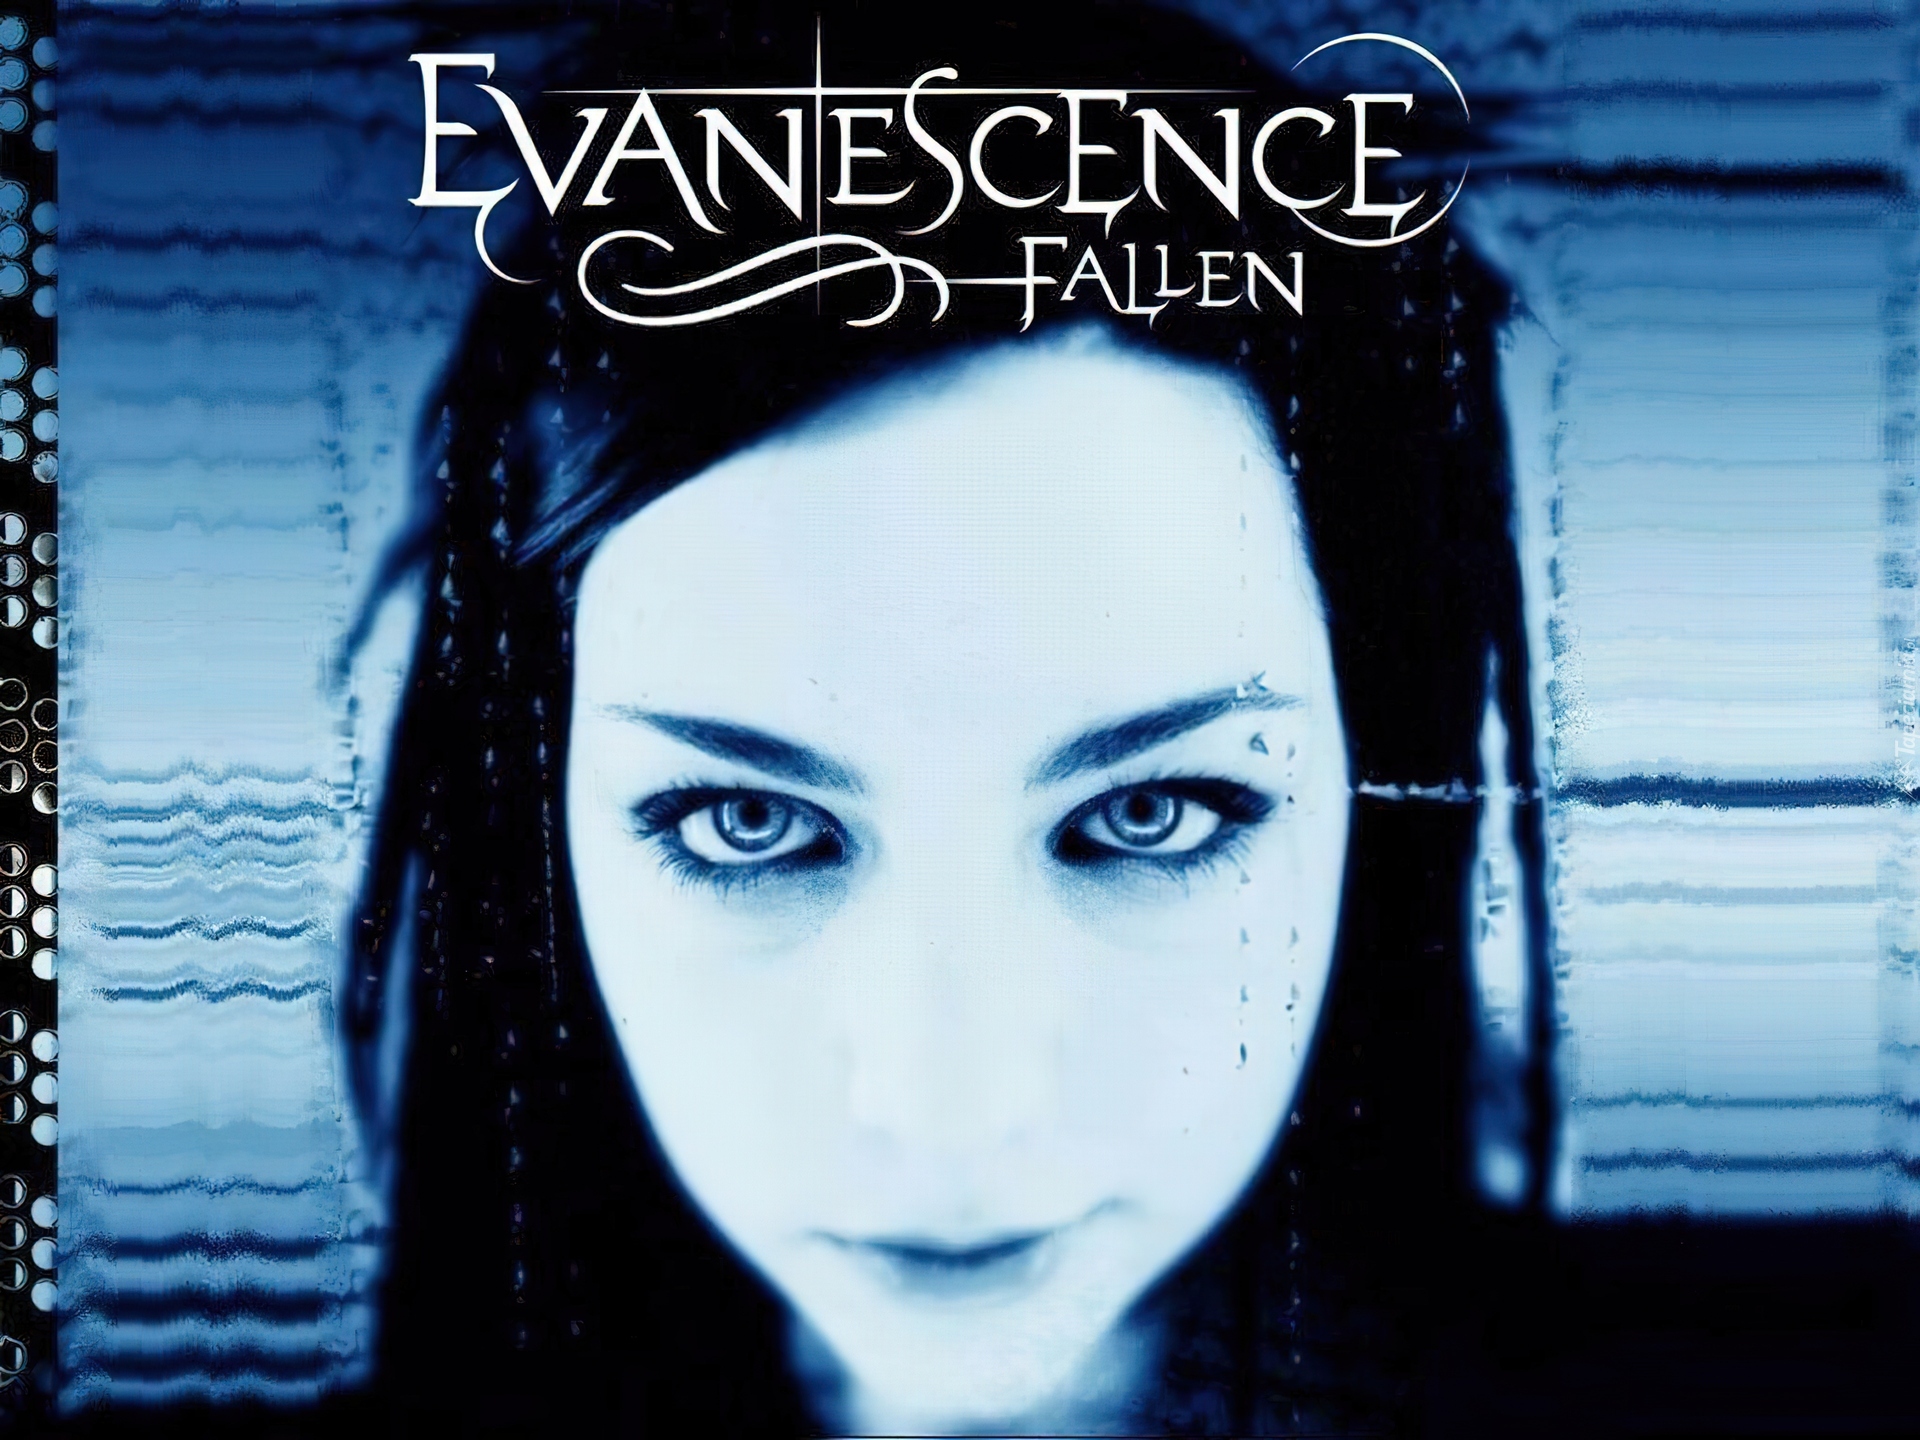 Evanescence going under. Evanescence - Fallen. Evanescence bring me to Life. Evanescence Wake me up inside текст. Evanescence hello